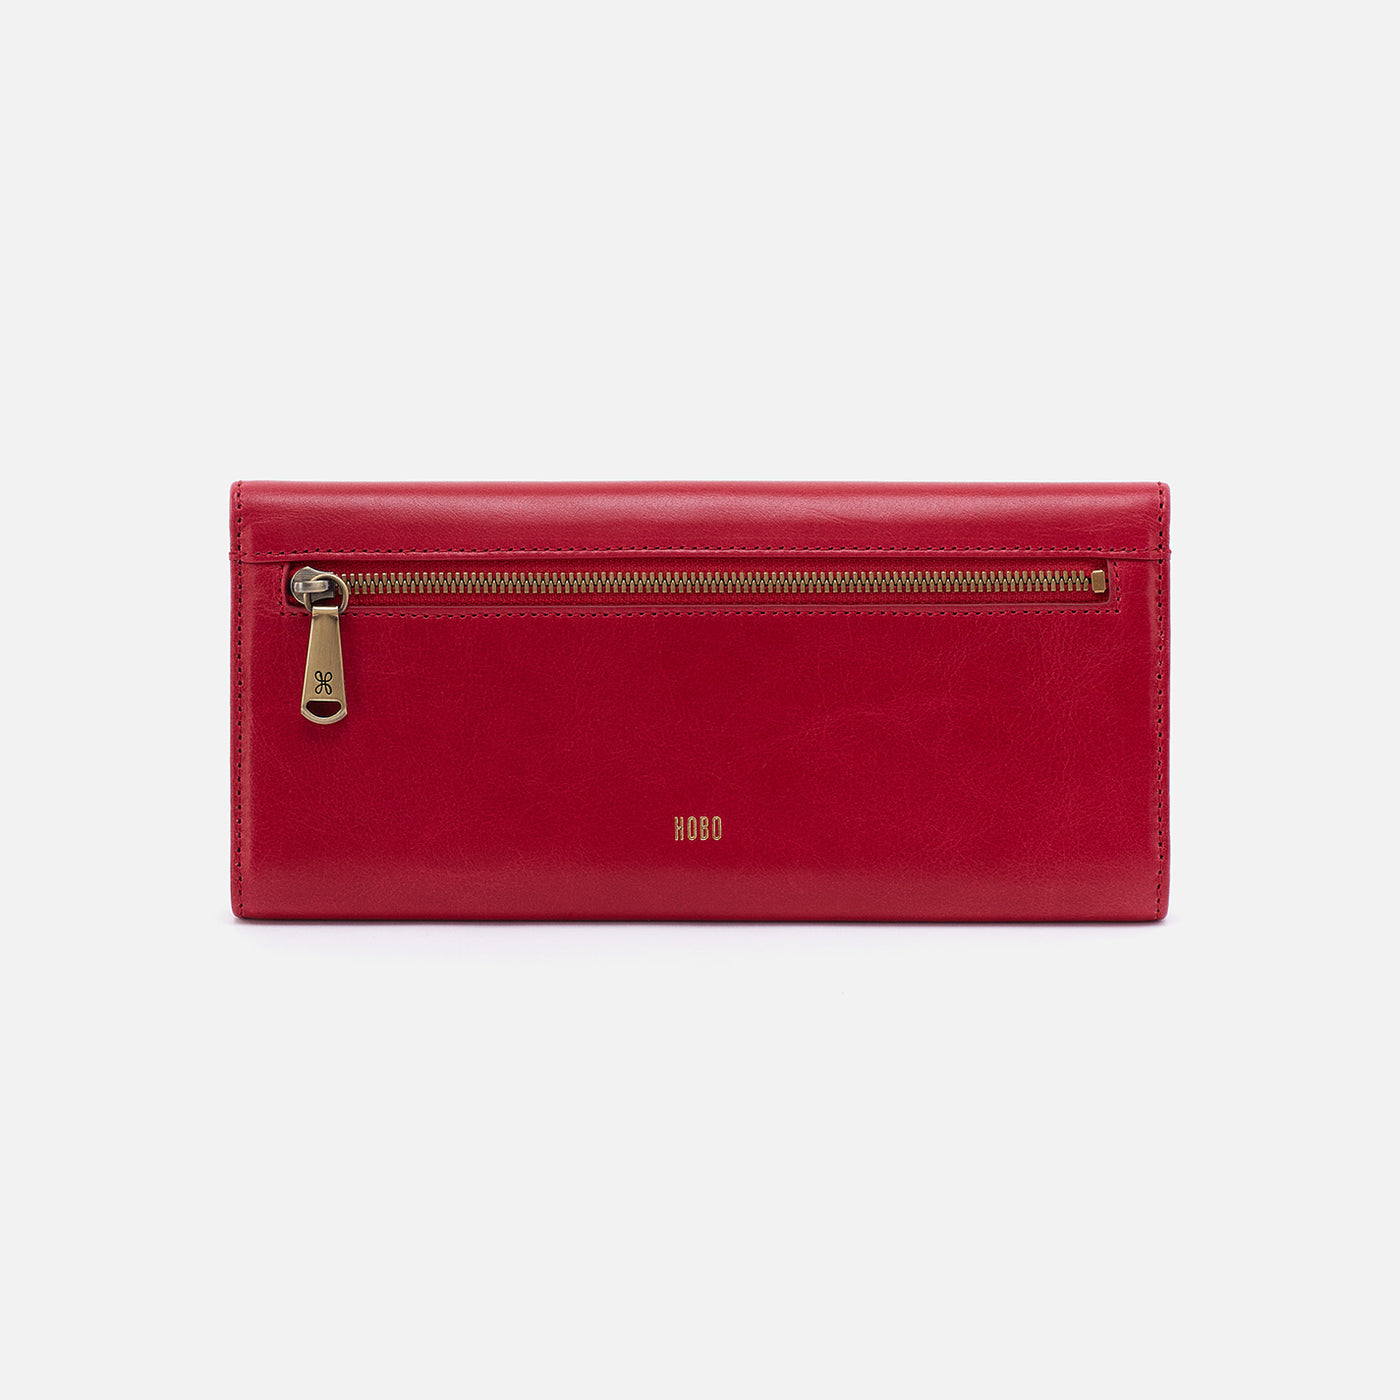 Jill Large Trifold Continental Wallet in Polished Leather - Claret